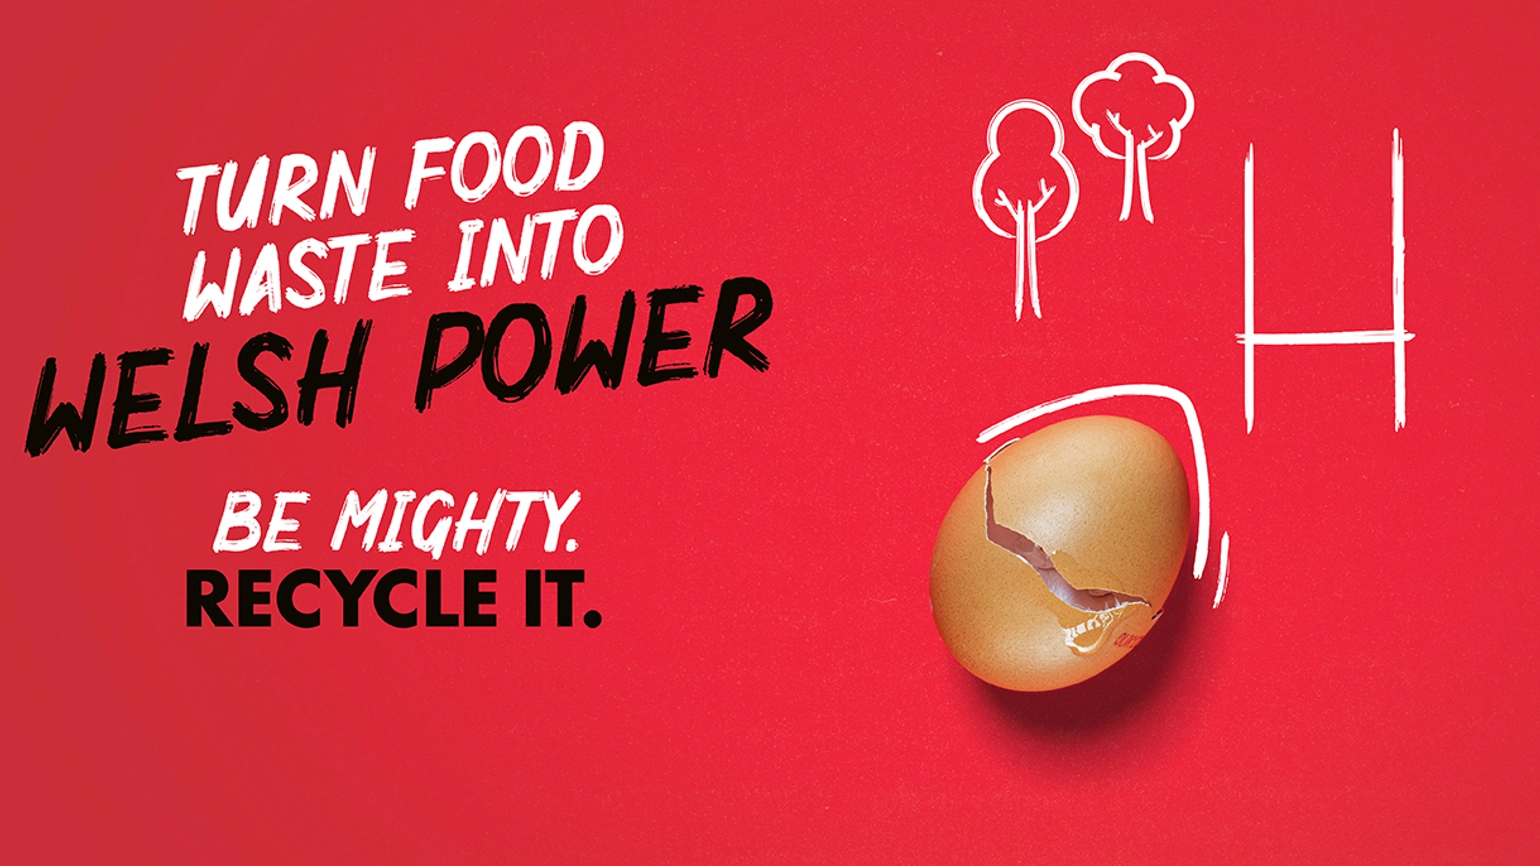 An egg shell sits on a red background with text reading 'Turn food waste into Welsh power. Be Mighty. Recycle it'